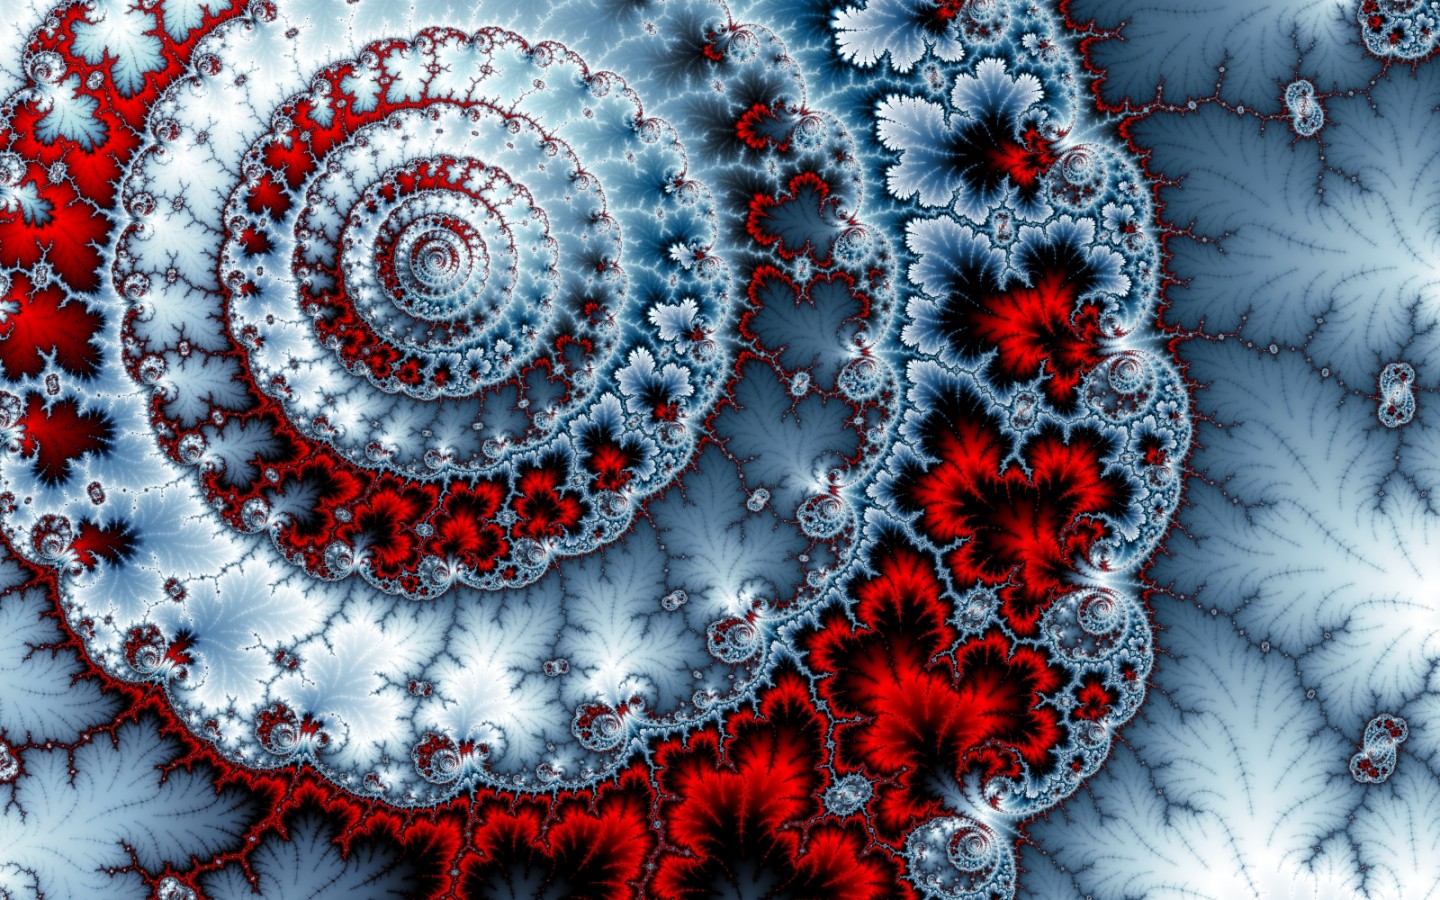 Wallpaper, abstract, red, snow, winter, spiral, frost, pattern, coral, circle, ART, flower, weather, design, fractal art, macro photography 1440x900